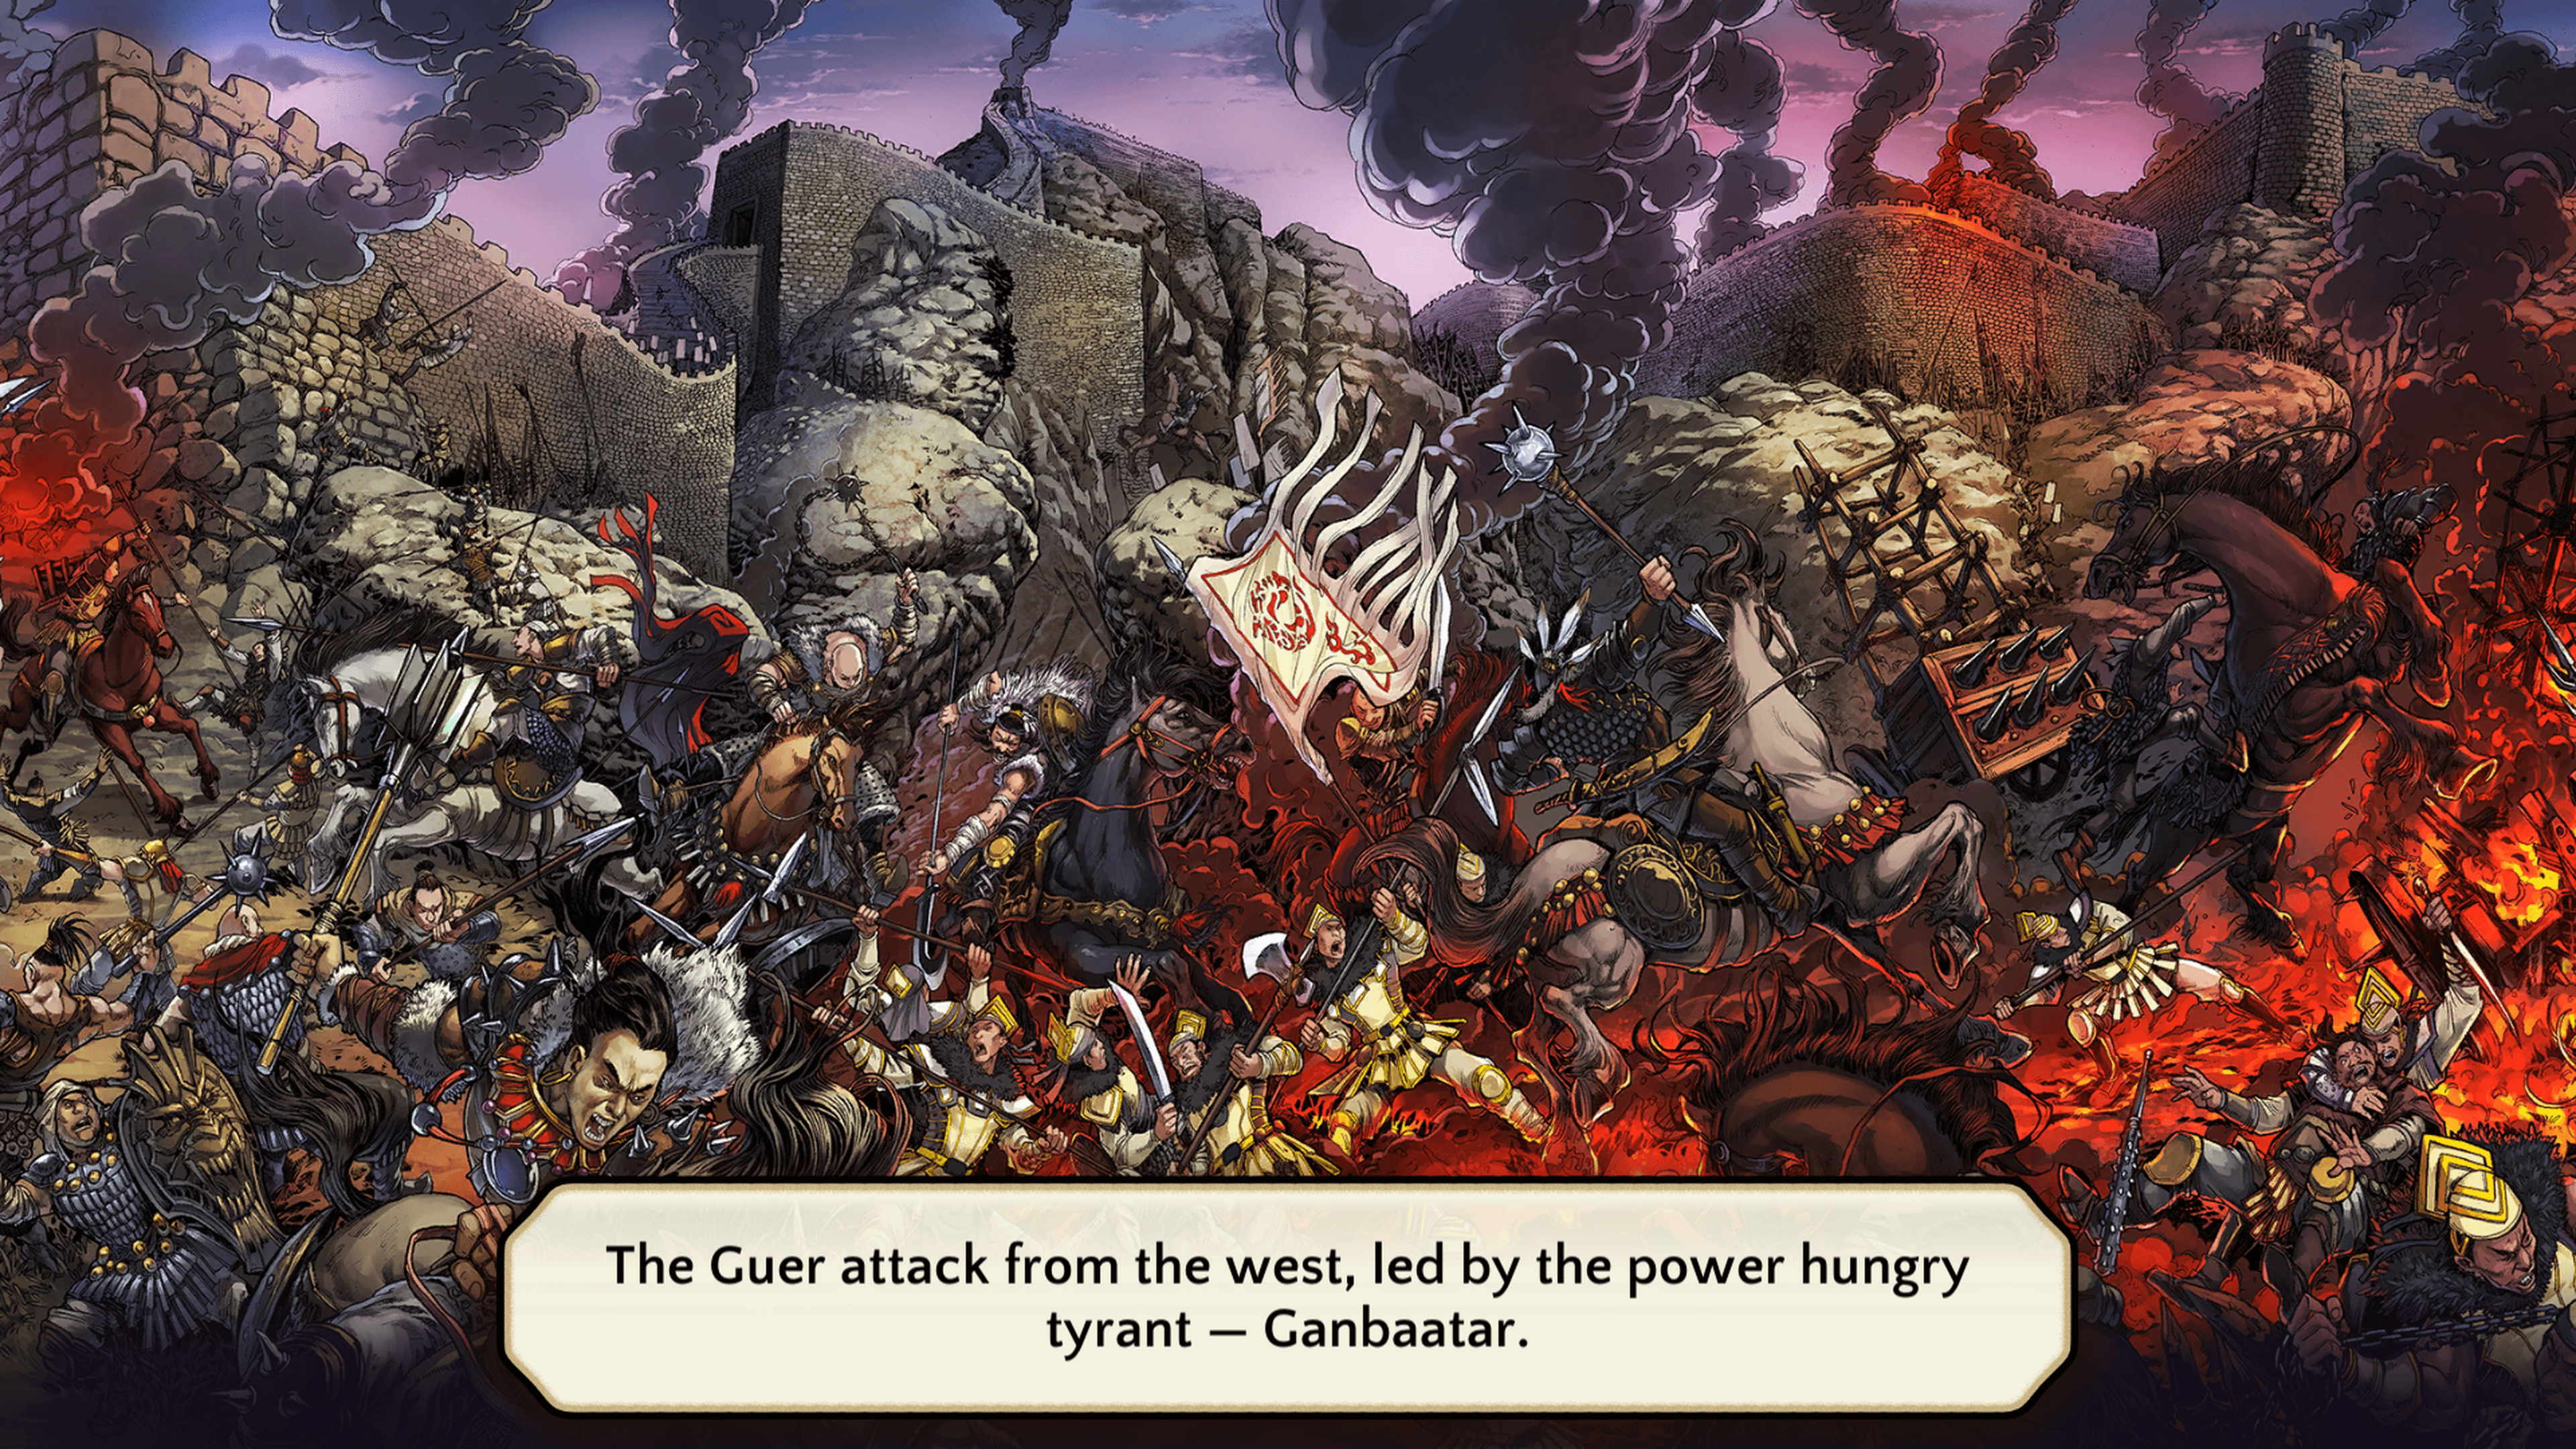 An epic battle plays out as an invading force attacks an ancient Chinese kingdom. It's a grim scene showing a lot of violence death and destruction in Shuyan Saga on PS5. A dialogue box at the bottom reads "The Guer attack from the west, led by the power hungry tyrant - Ganbaatar."